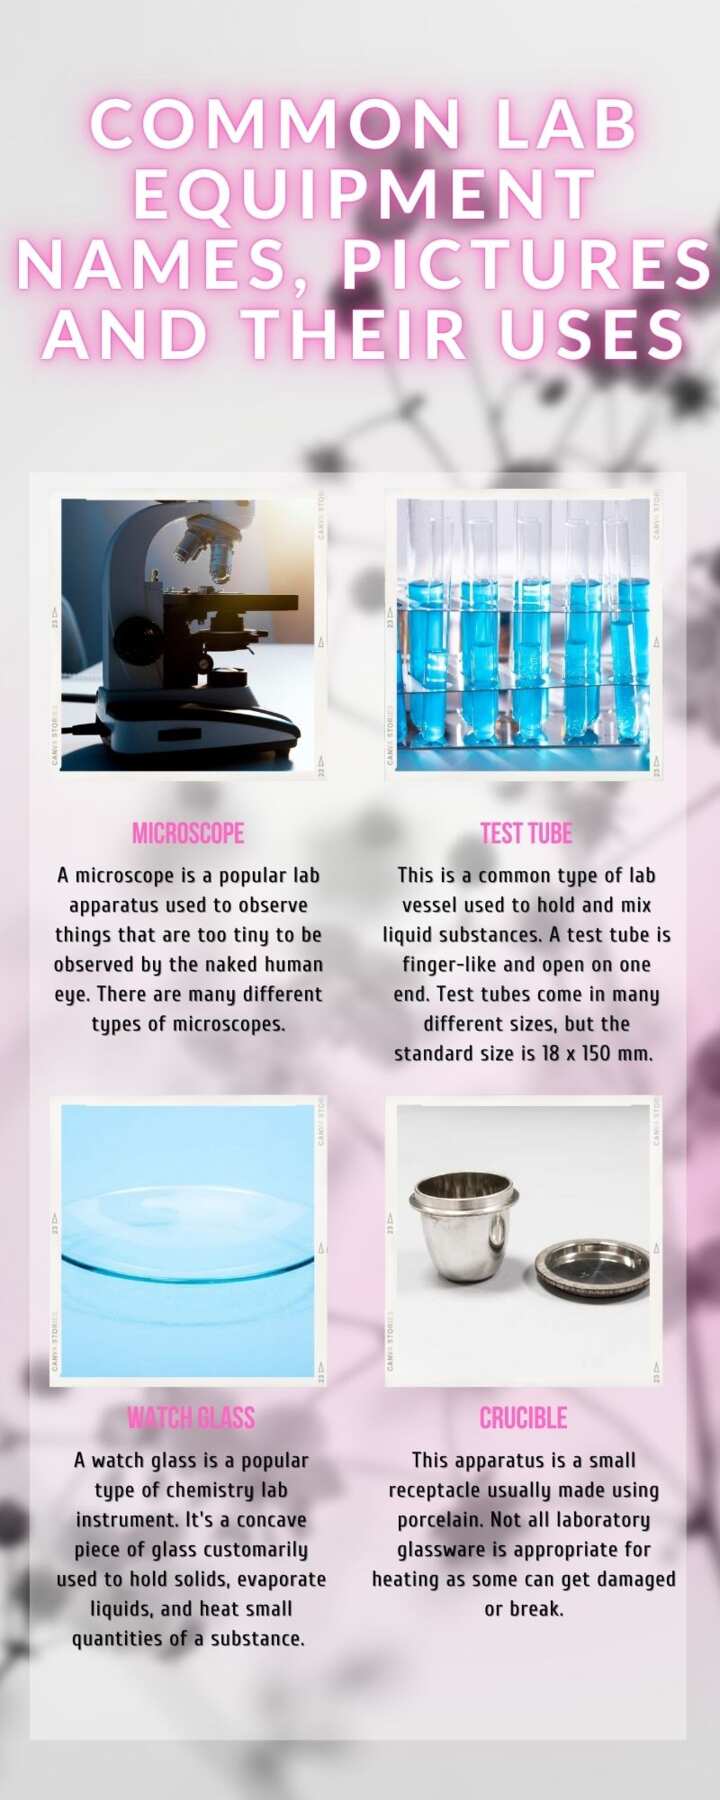 25 most common laboratory equipment and their uses with pictures - Legit.ng